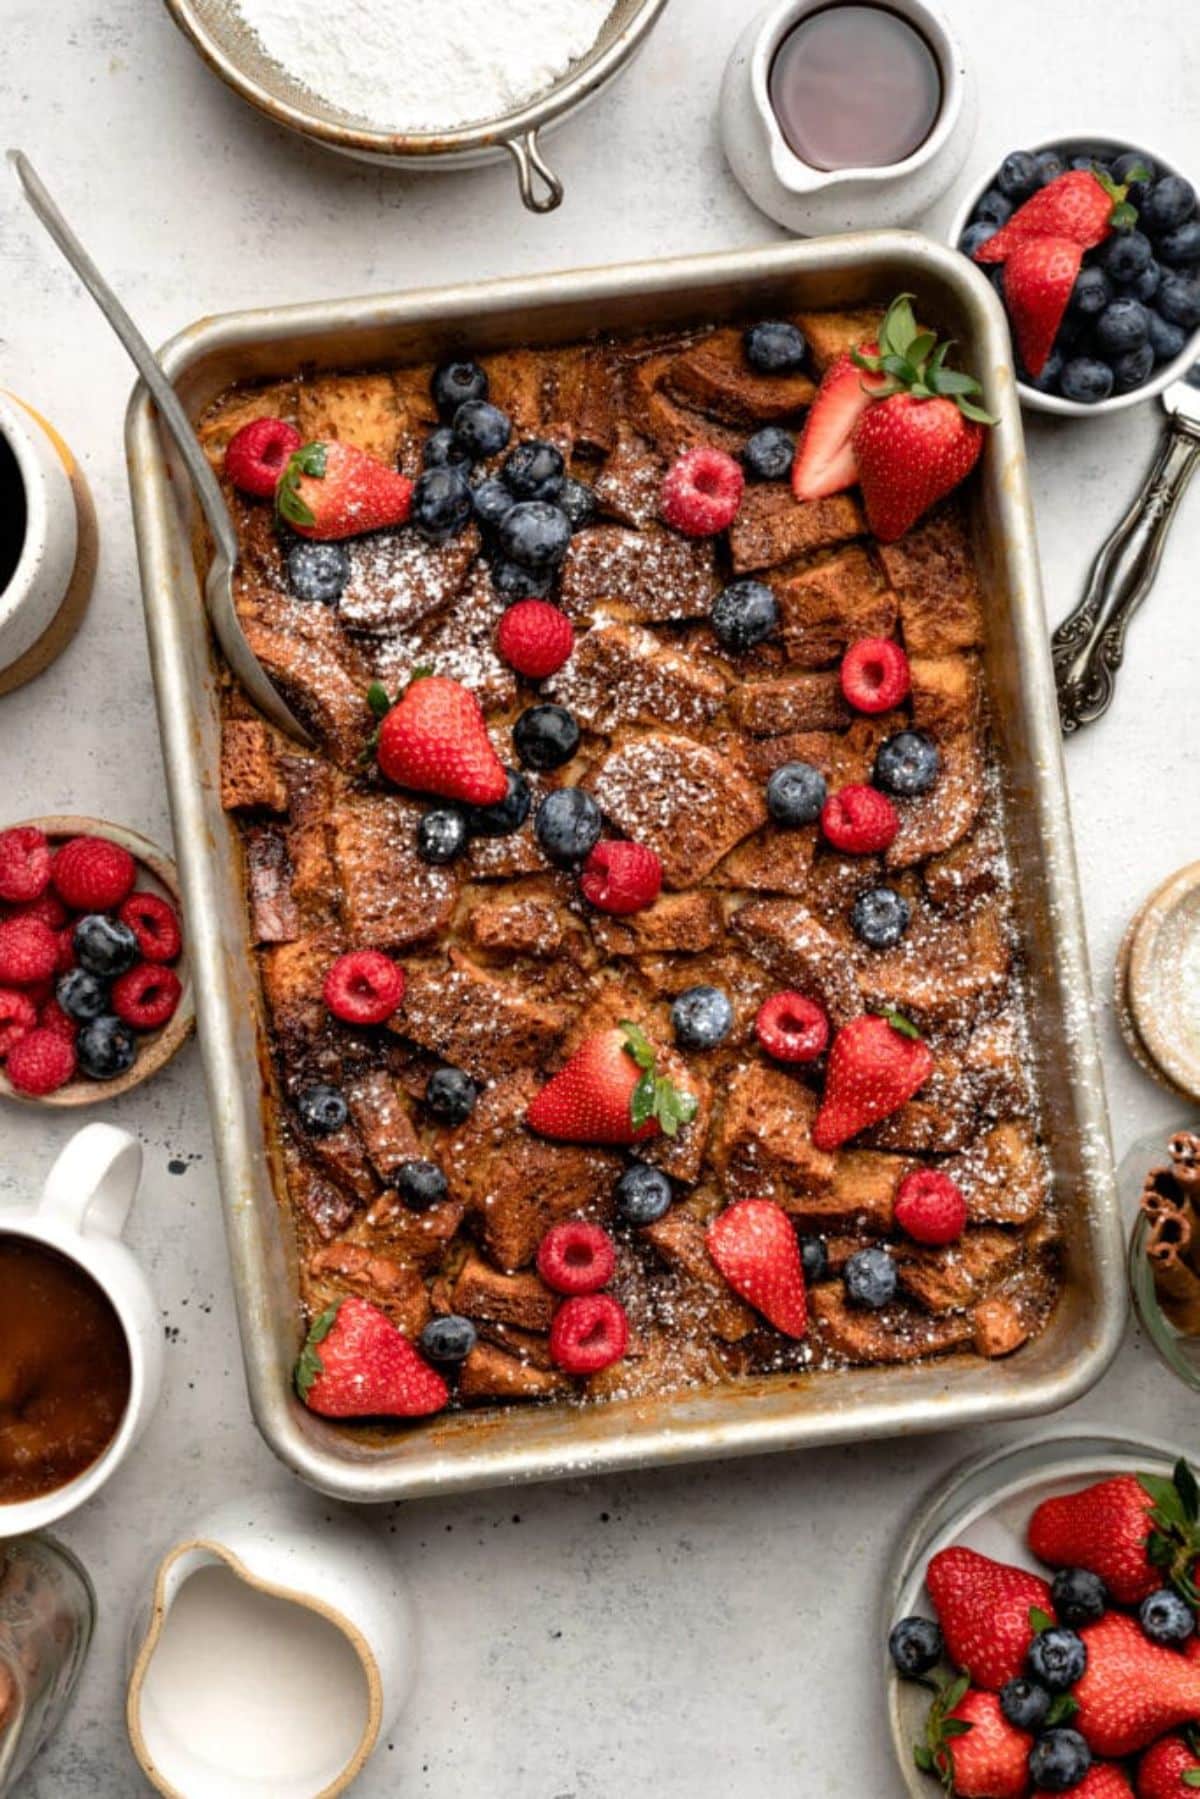 Flavorful Gluten-Free French Toast in a casserole.